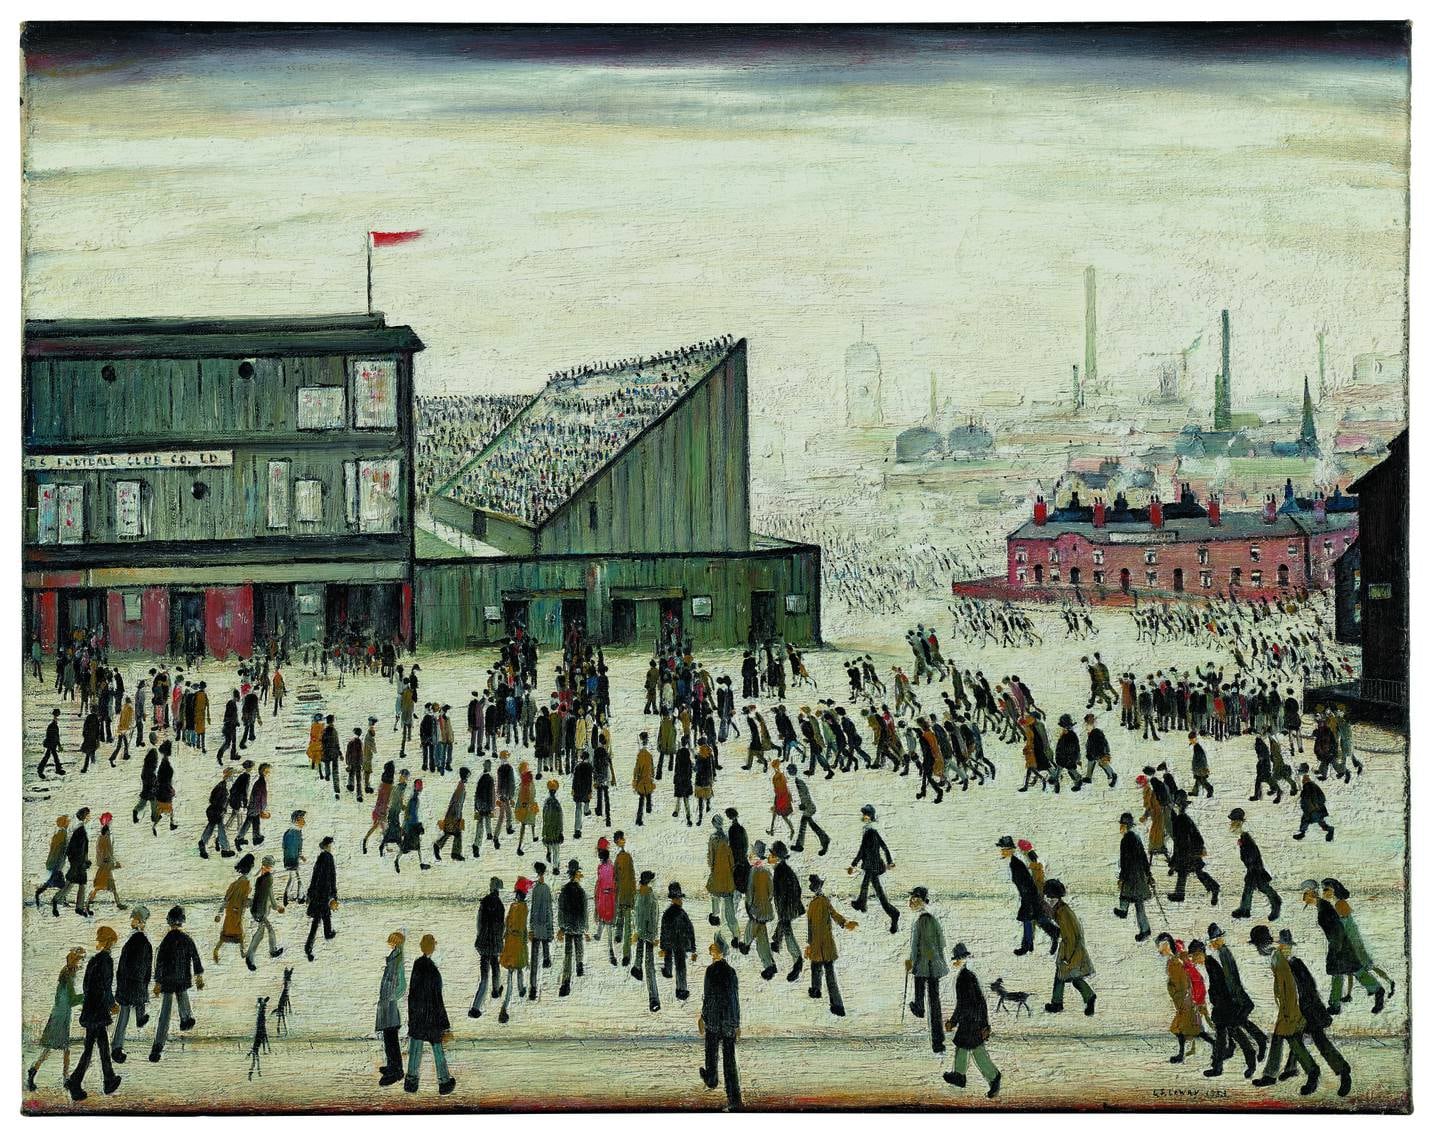 'Going to the Match' by L S Lowry (1953). Photo: Christie's Dubai